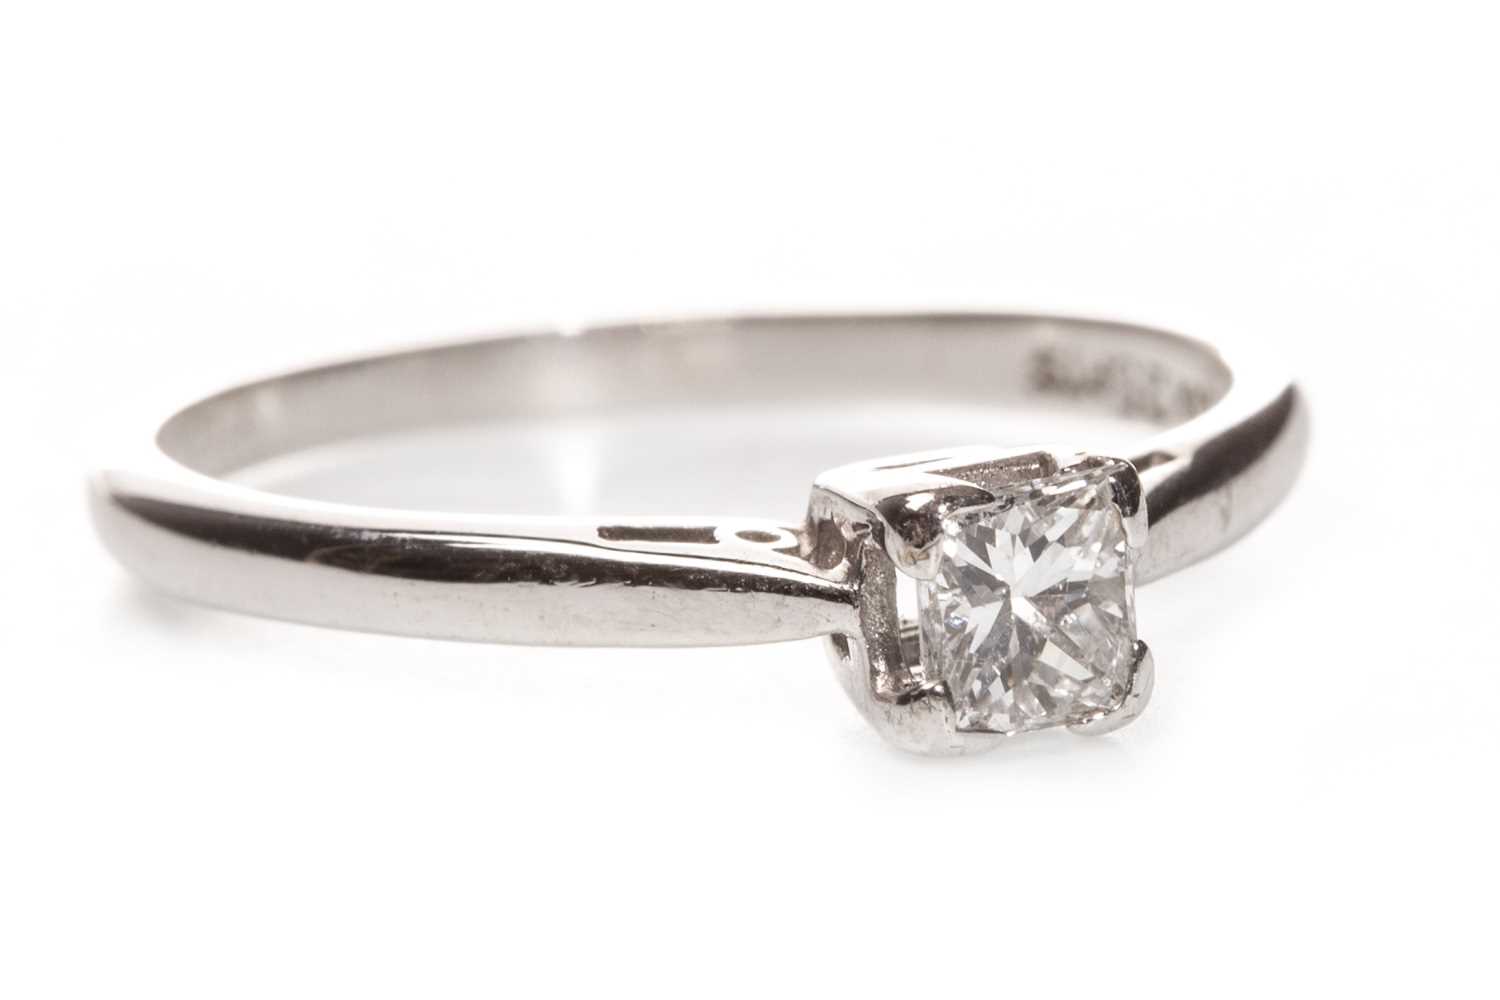 Lot 206 - A DIAMOND SOLITAIRE RING